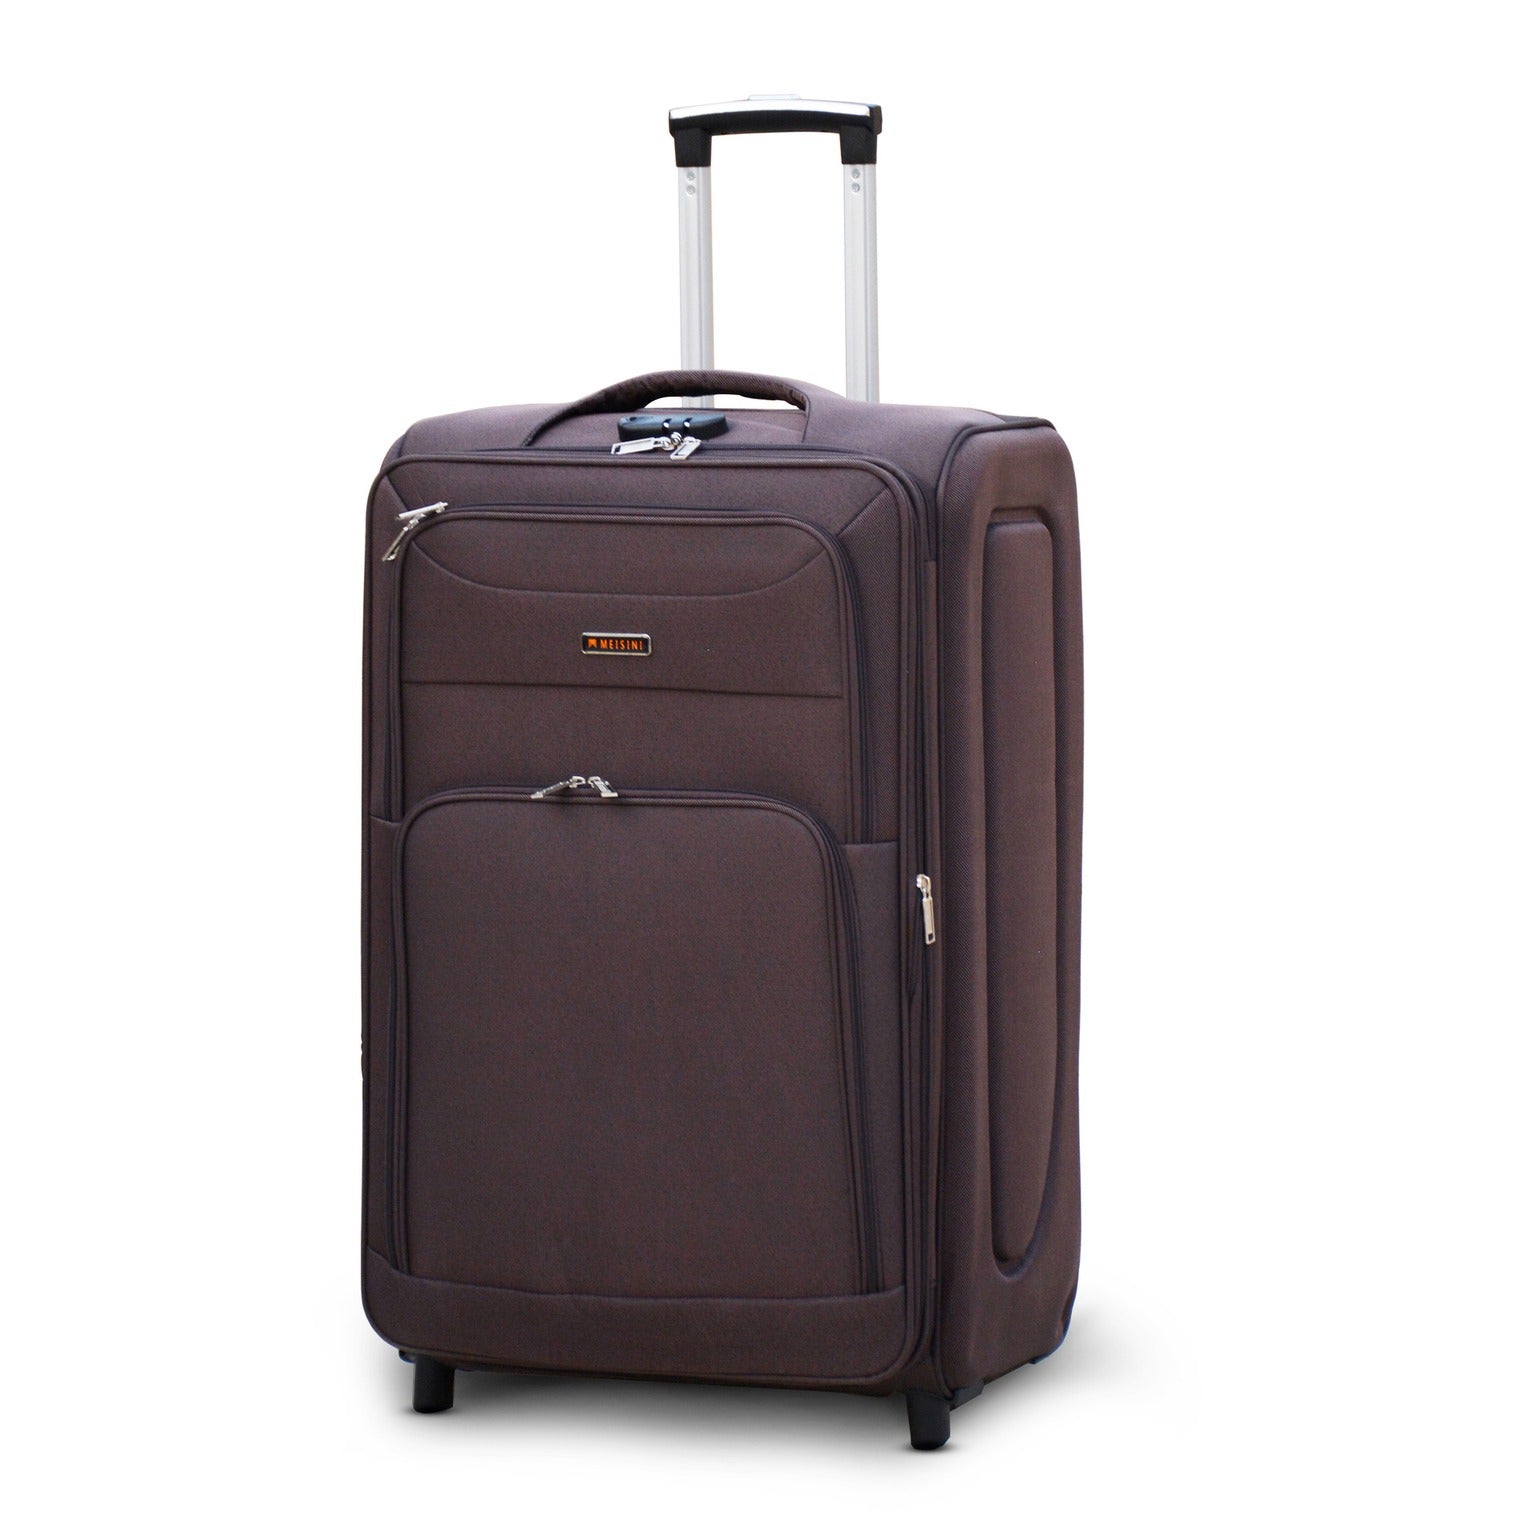 28" Coffee Colour LP 2 Wheel 0161 Luggage Lightweight Soft Material Trolley Bag